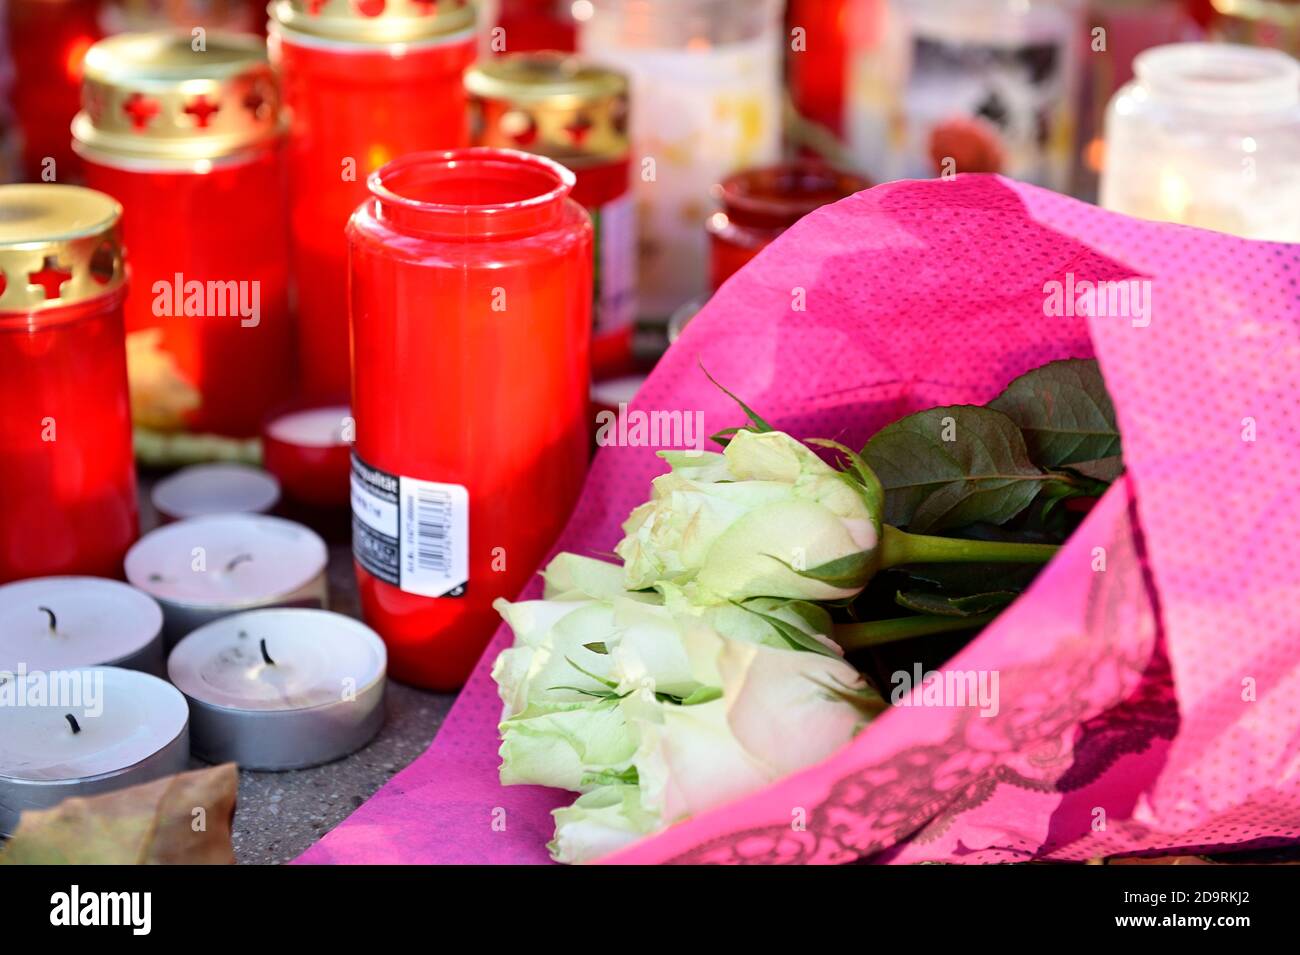 Vienna, Austria. 7th Nov, 2020. People mourn the victims of the terrorist attack on November 02, 2020. Picture shows flowers and candles at the crime scene. Stock Photo